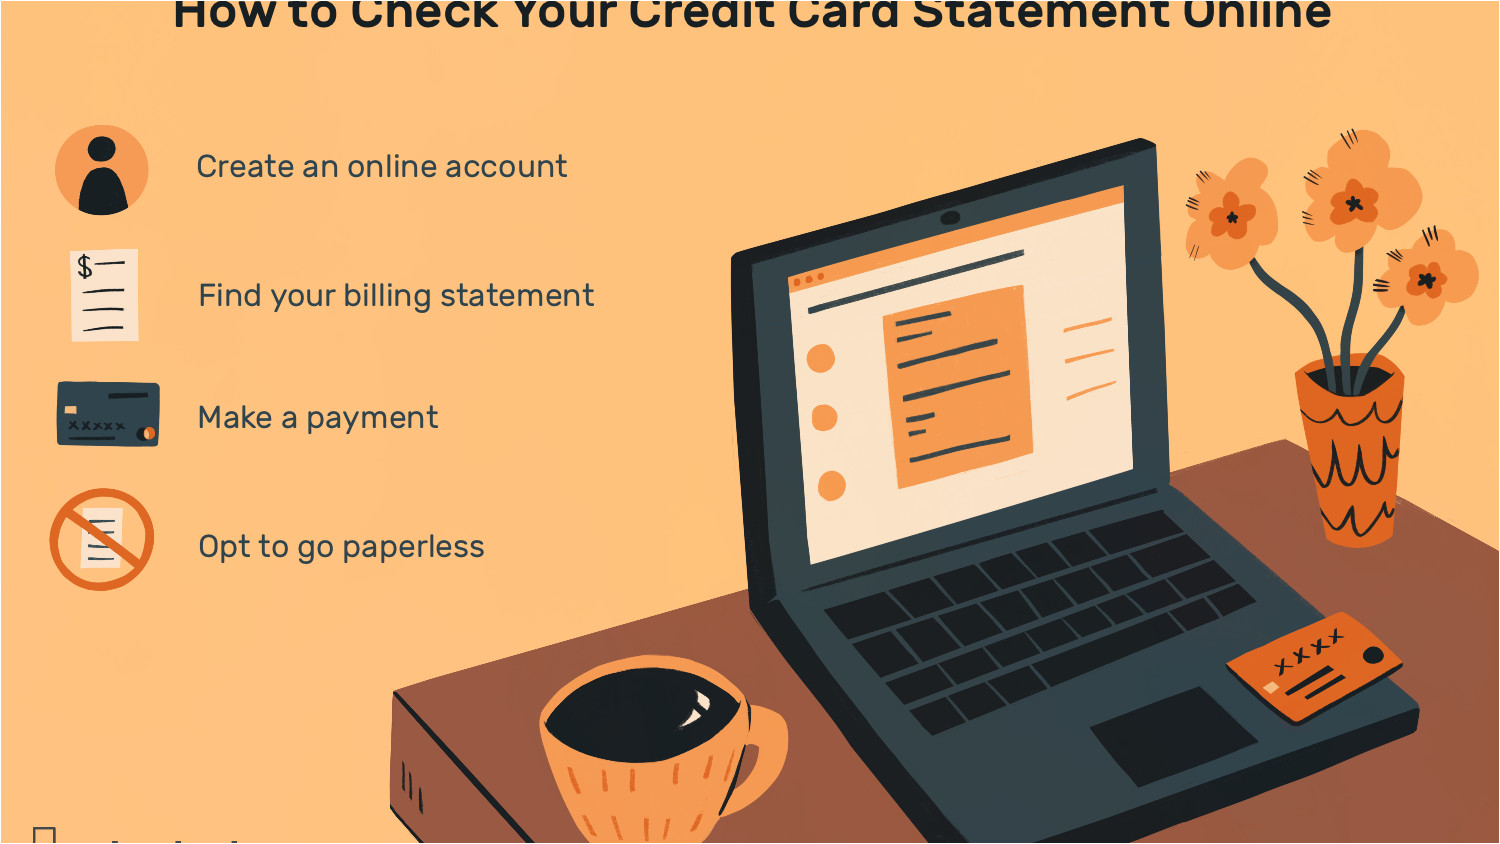 how to check your credit card statement online 960081 v3 5c2a03fe980f4a2c9cc2b70699b20bf3 png